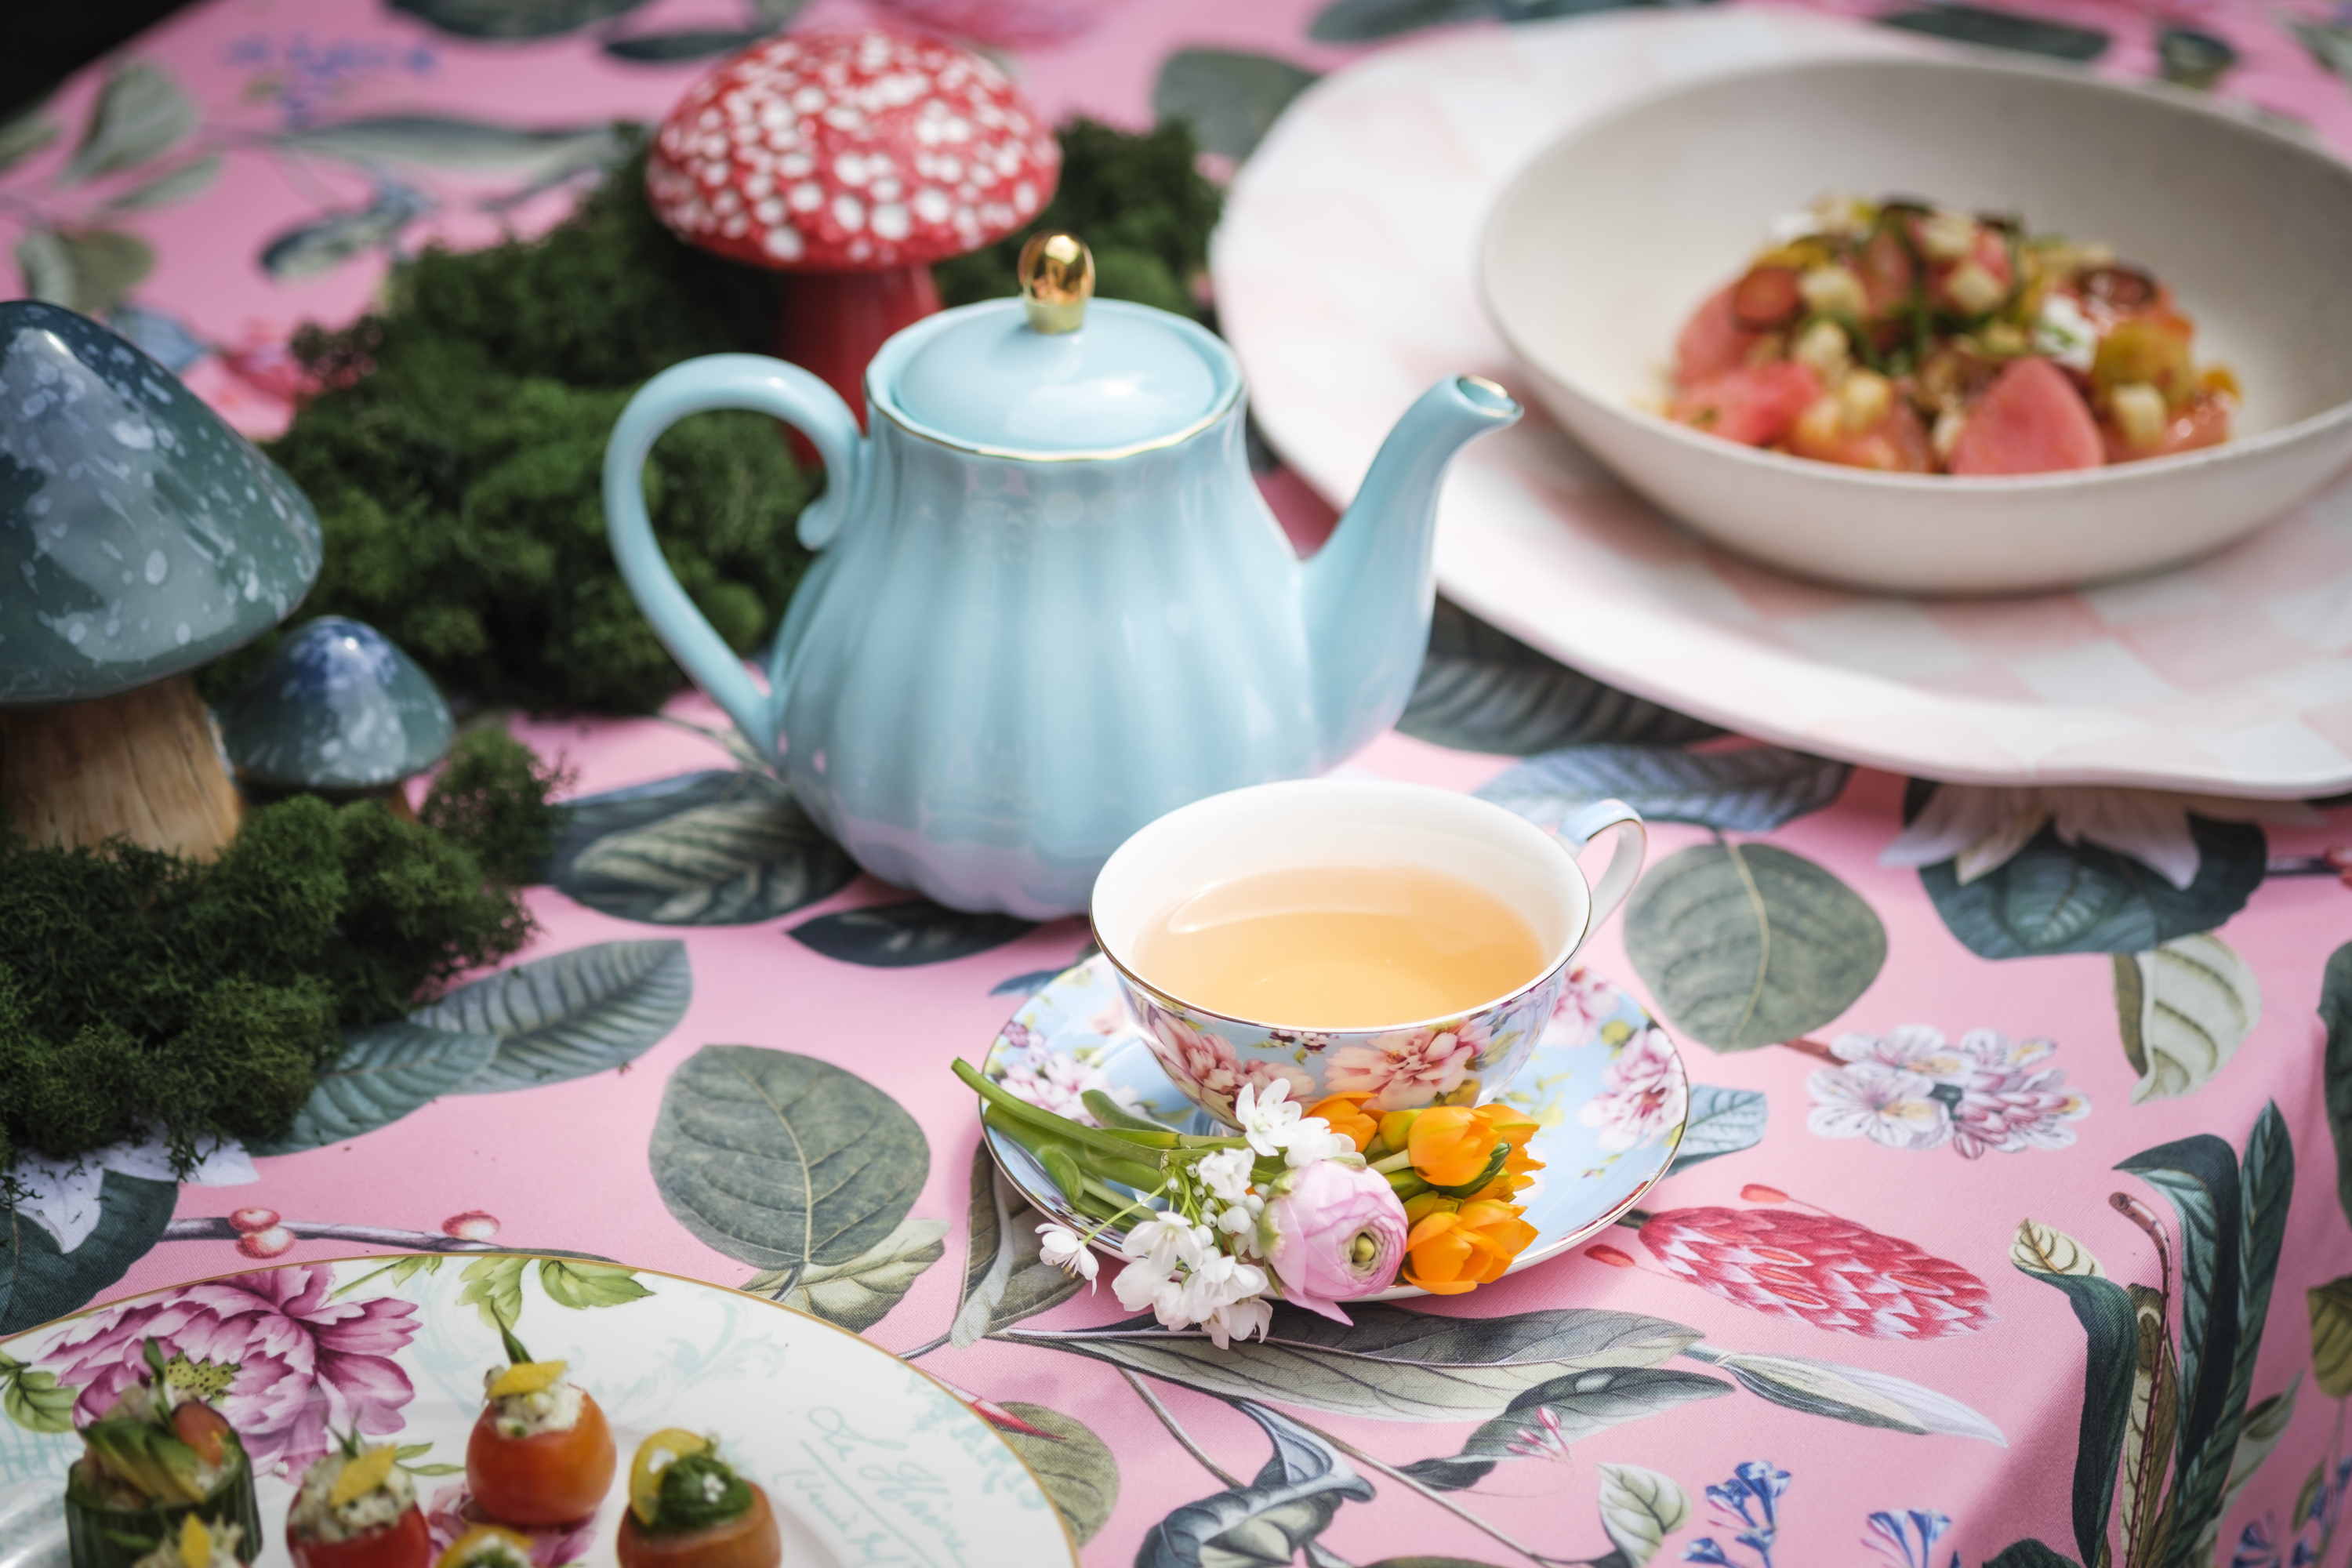 You can have a whimsical tea party at the New York Botanical Garden this summer